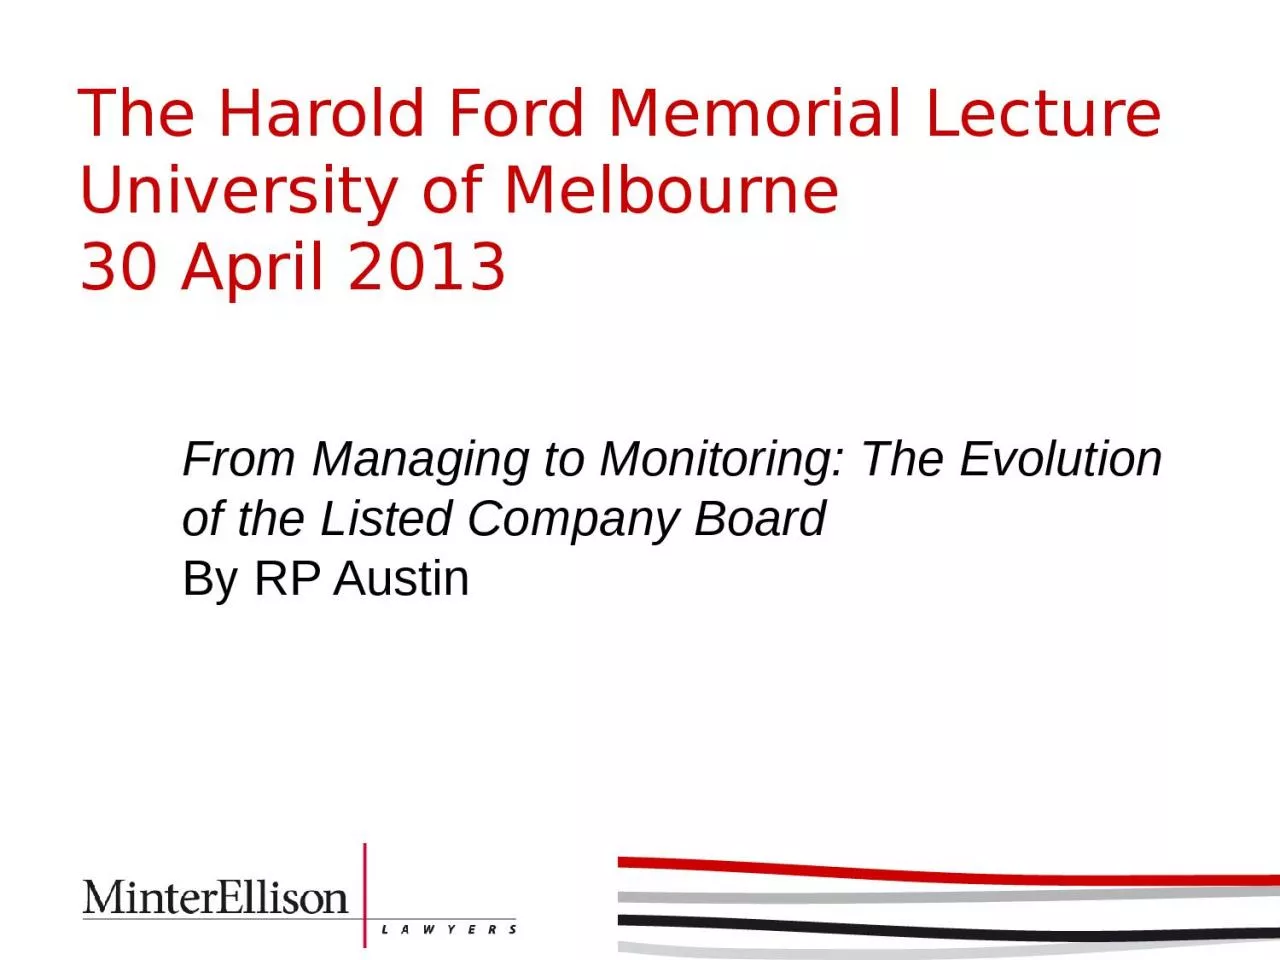 The Harold Ford Memorial Lecture